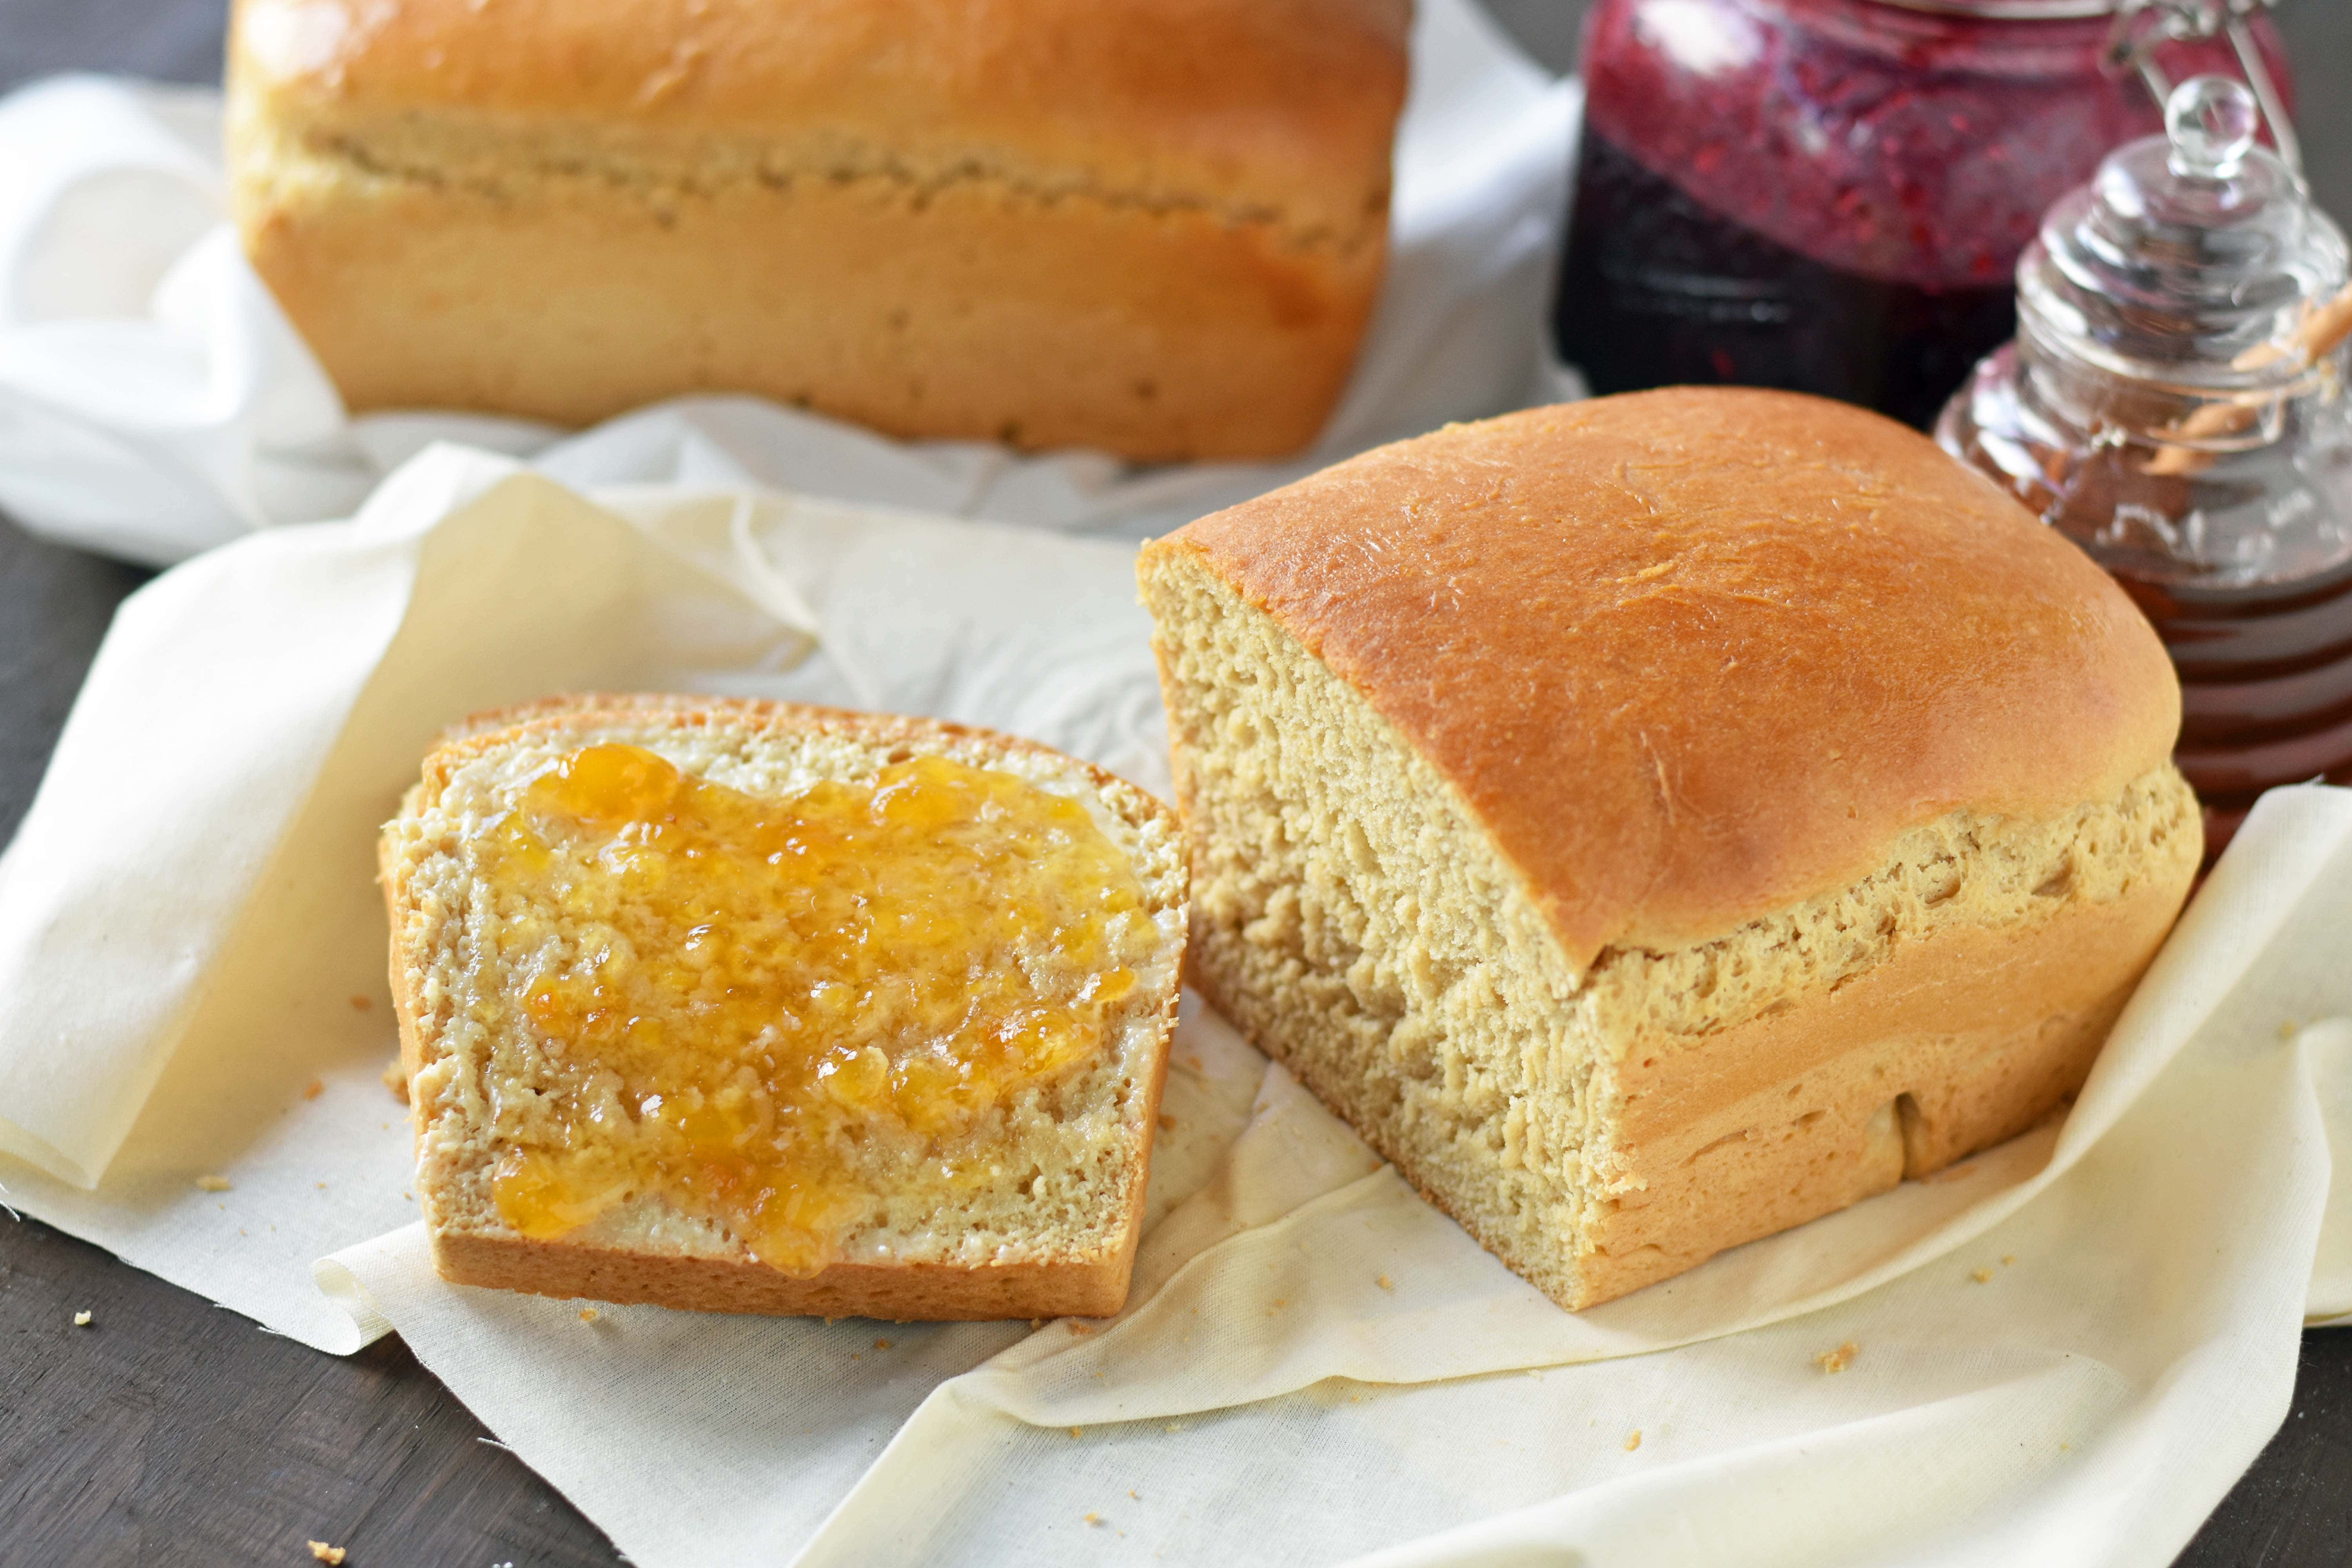 How to Whip Up Healthy Homemade Bread